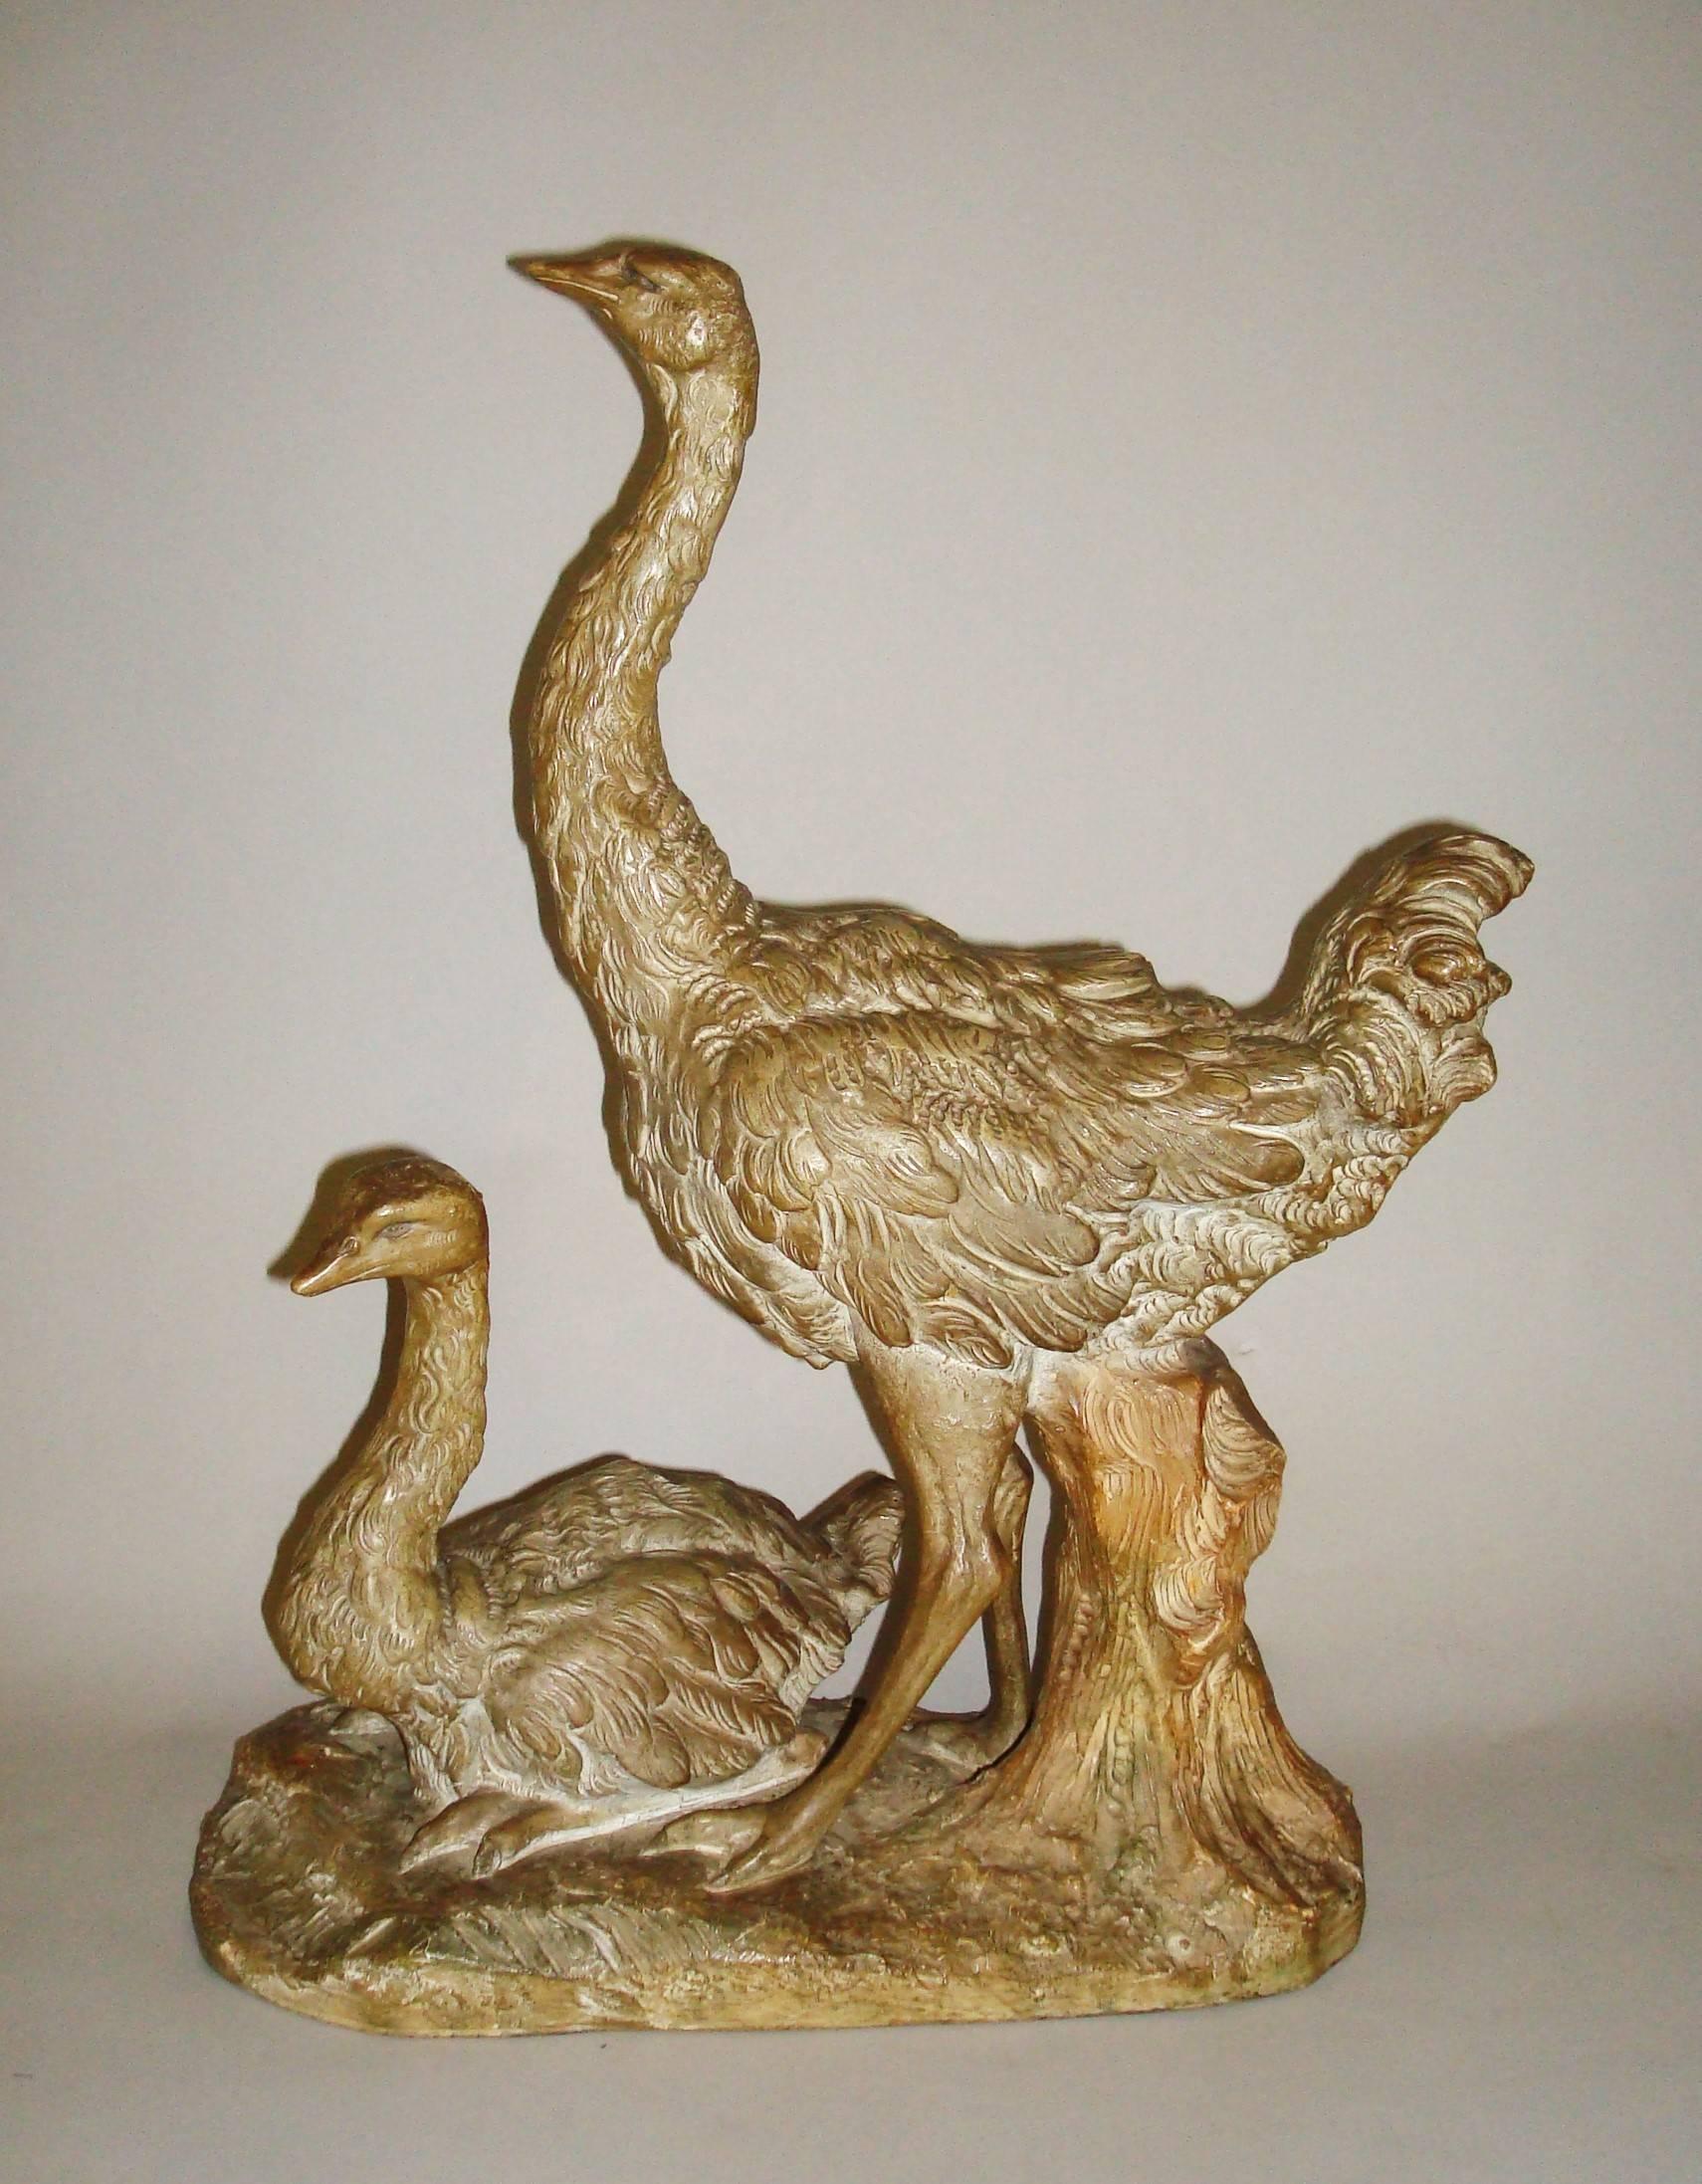 Early 20th century terracotta sculpture of two ostriches with a patinated bronzed finish. The larger ostrich, poised with head raised and prominent tail feathers, the smaller bird, presumably her chick sitting at her feet. The whole on an oval